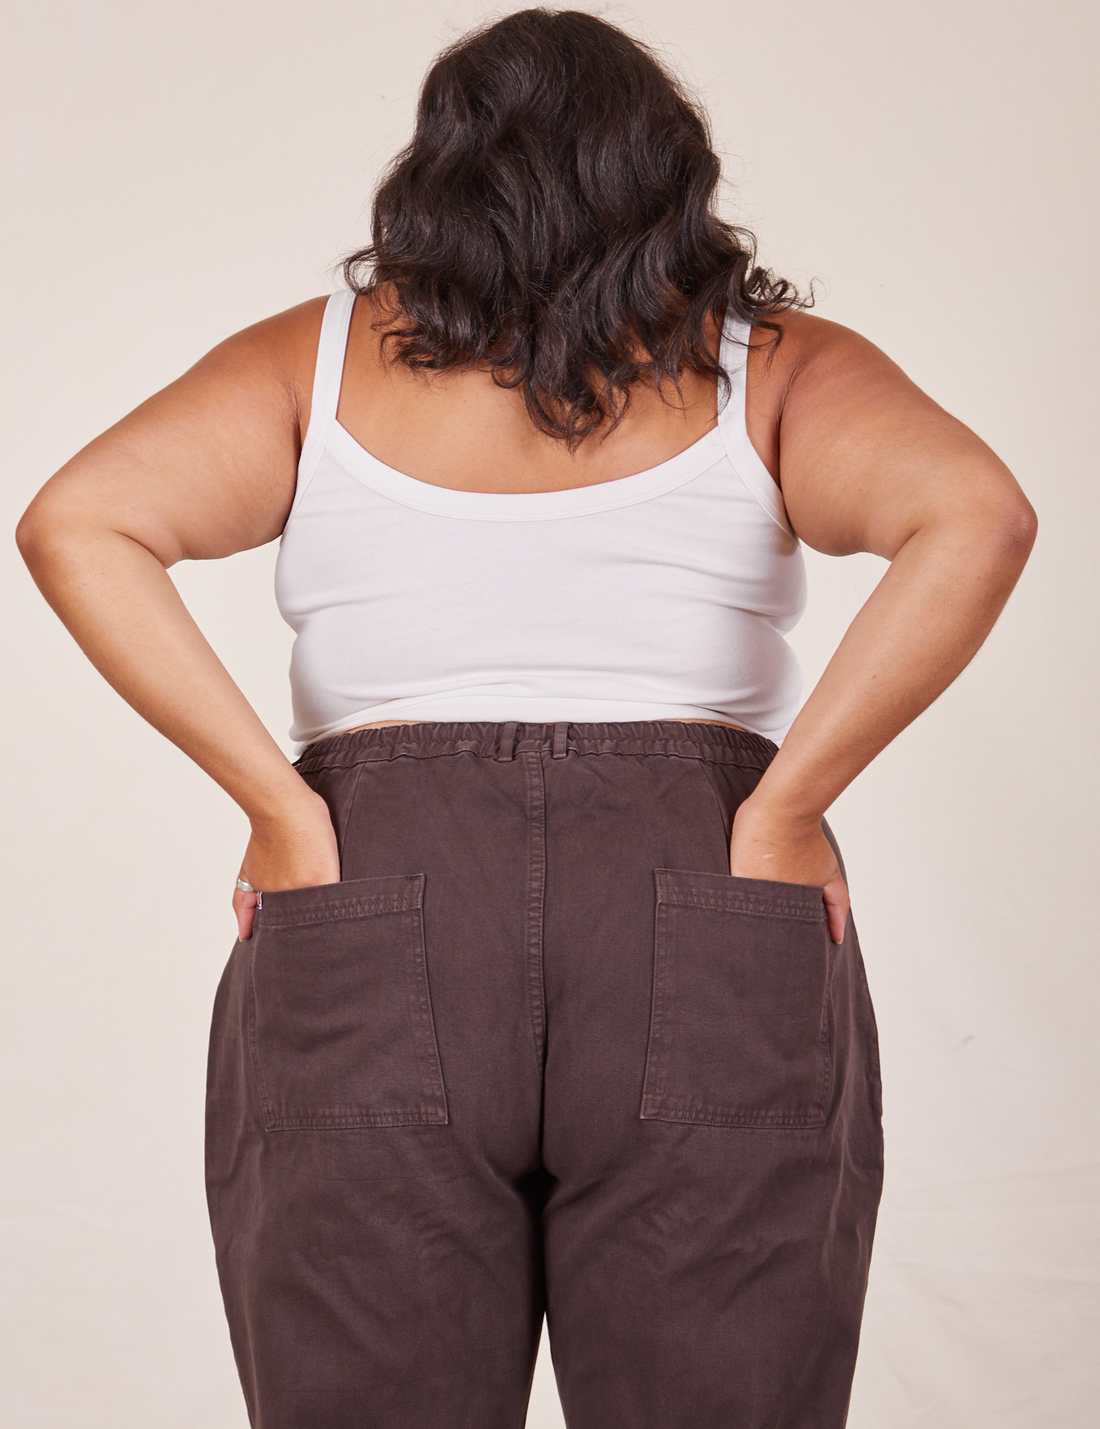 Back view of Cropped Cami in Vintage Off-White and espresso brown Western Pants worn by Alicia. She has both her hands in the back pant pocket.